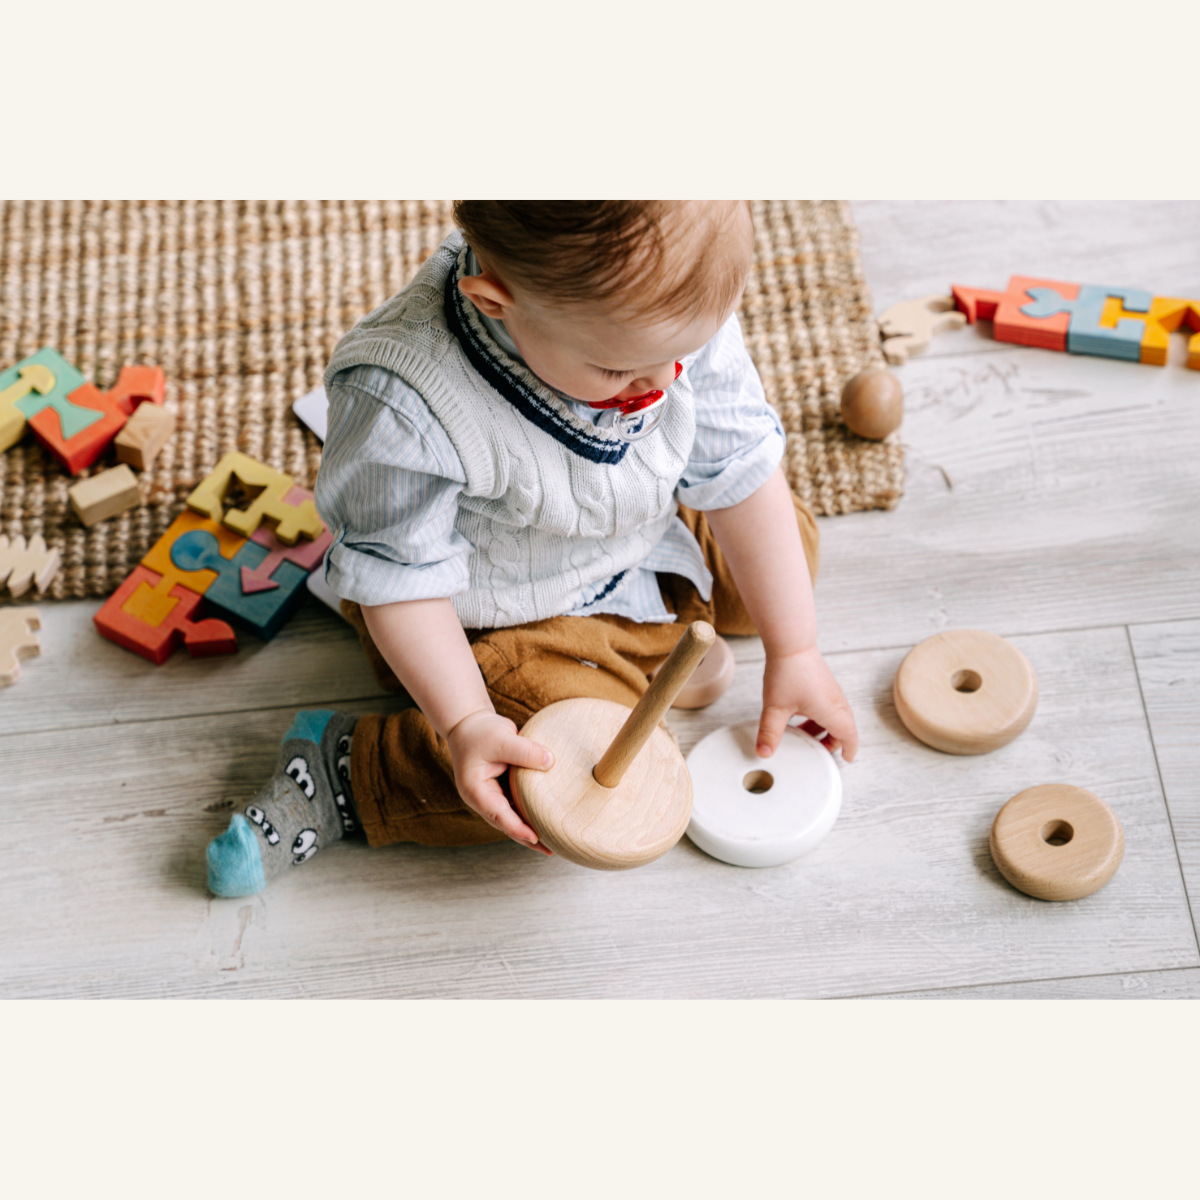 Baby playing with non-toxic toys